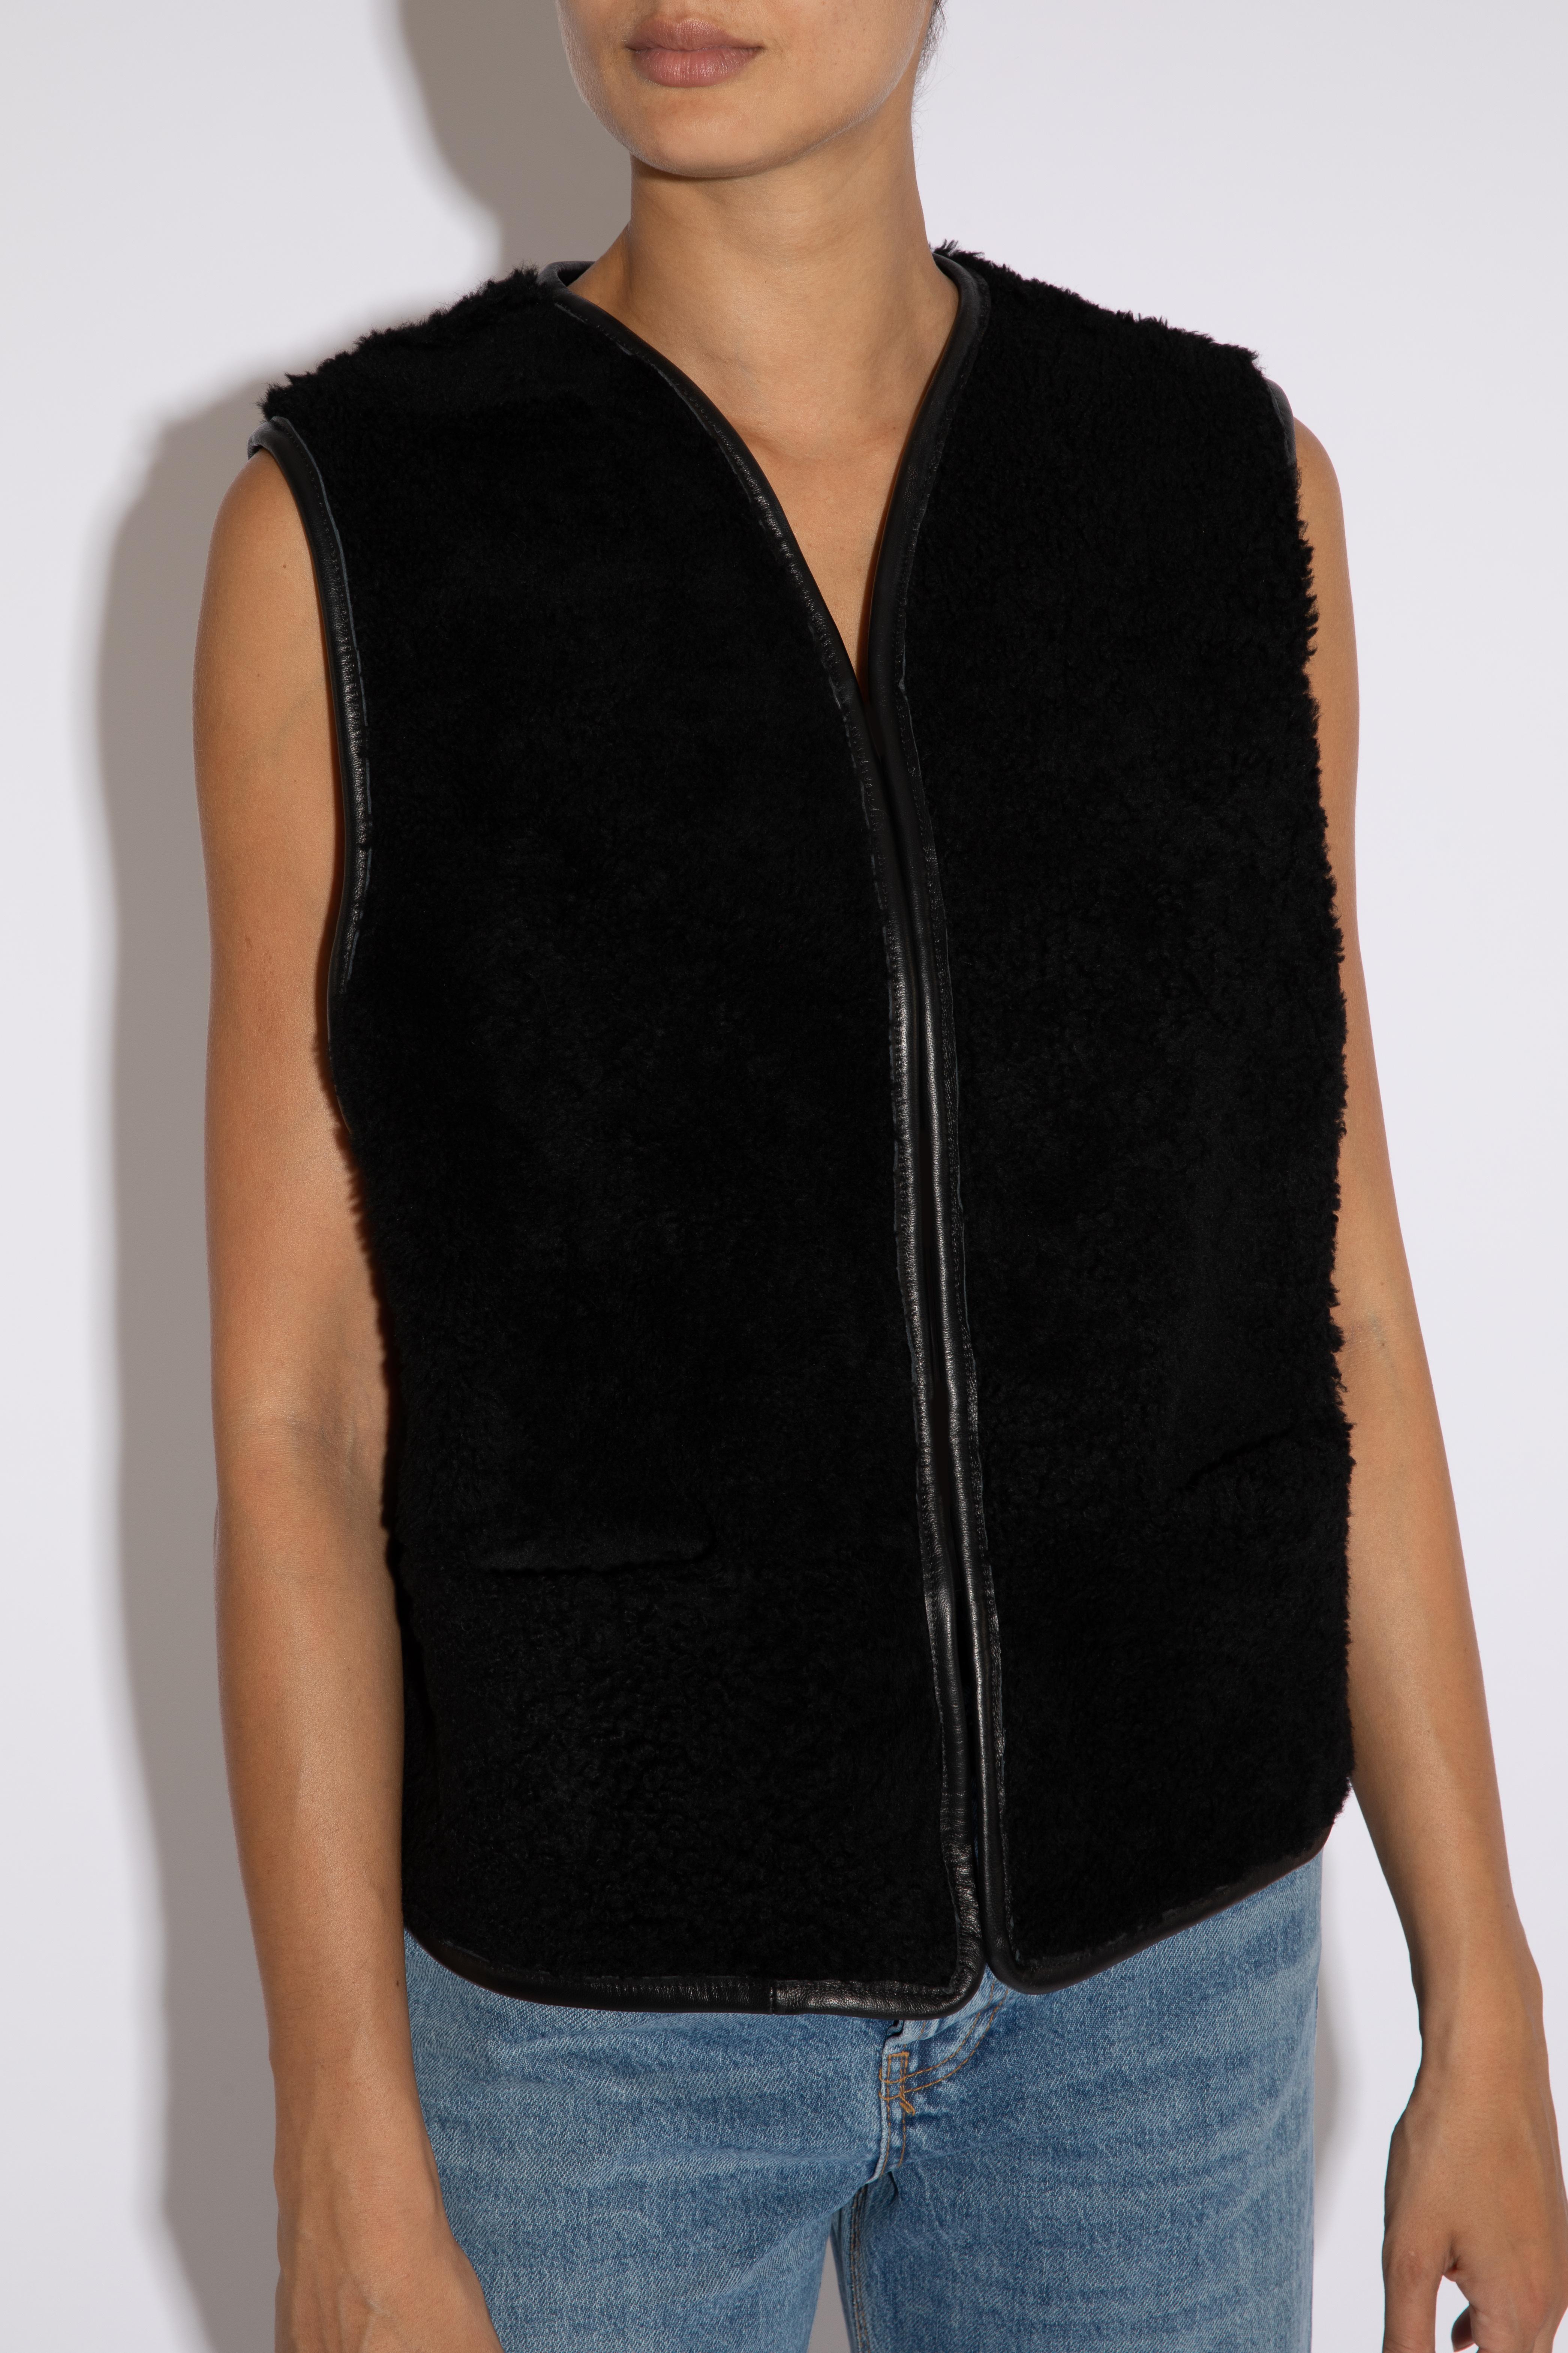 Verheyen London Reversible Shearling Gilet in Black - Size large

Handmade in London, made with lamb merino shearling this luxury item is an investment piece to wear for a lifetime.  One side is leather and one side is merino shearling. Ideal for